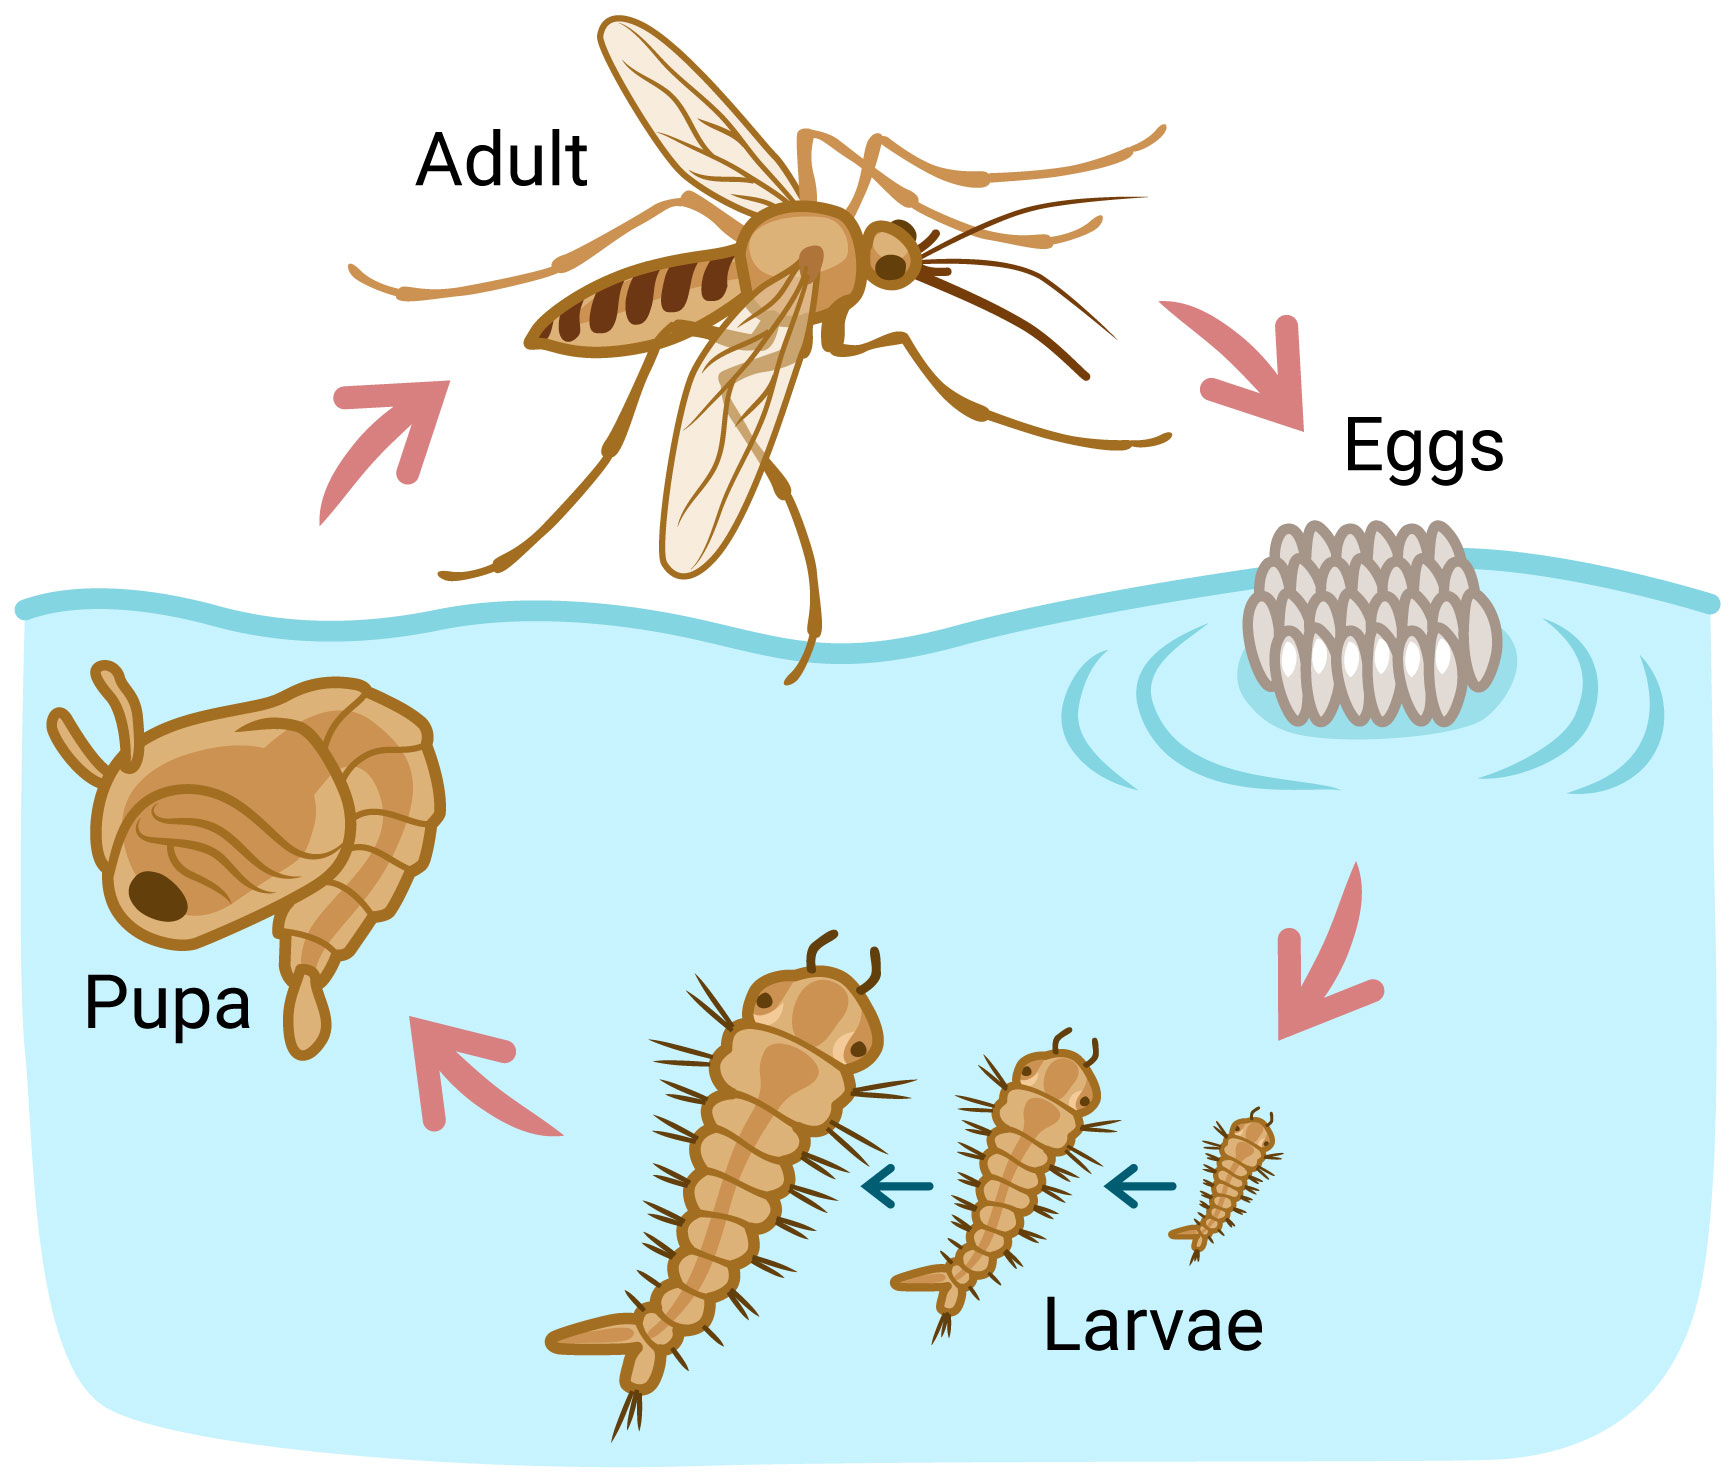 The mosquito life cycle from adult, eggs, larvae, pupae and back to adult.